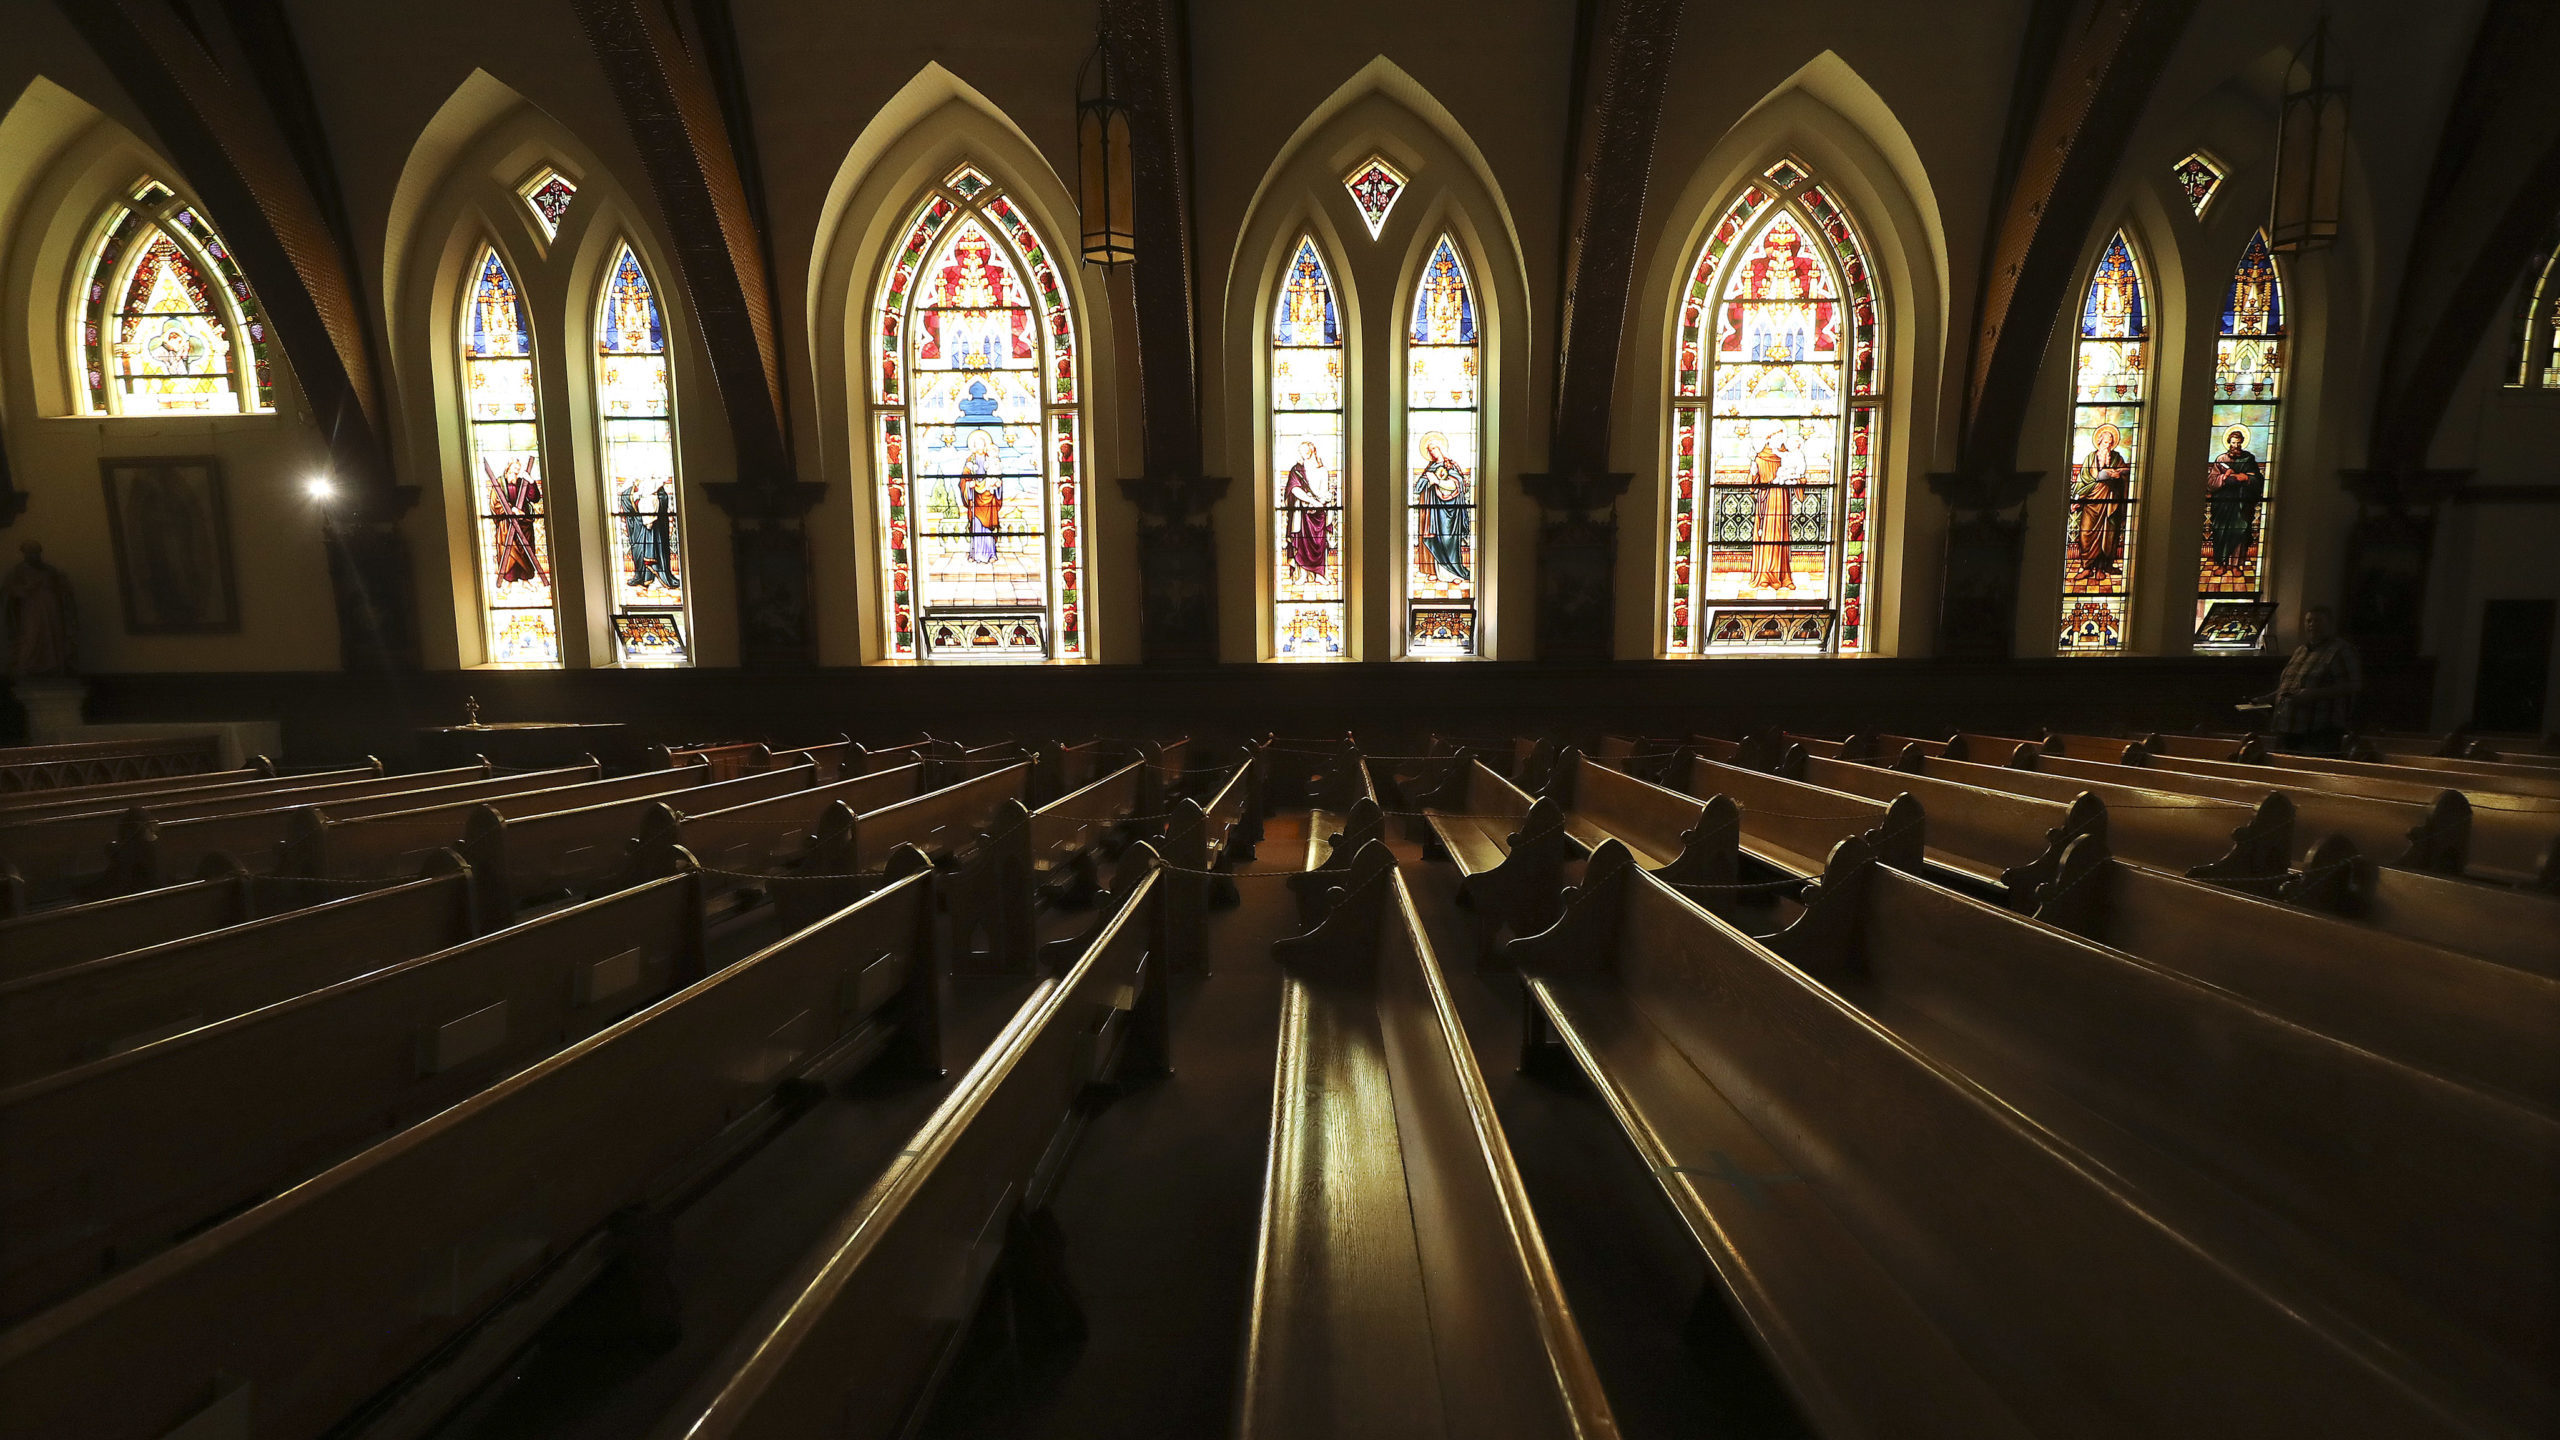 Light shines through the stained glass windows in St. Joseph Catholic Church in Ogden on Tuesday, J...